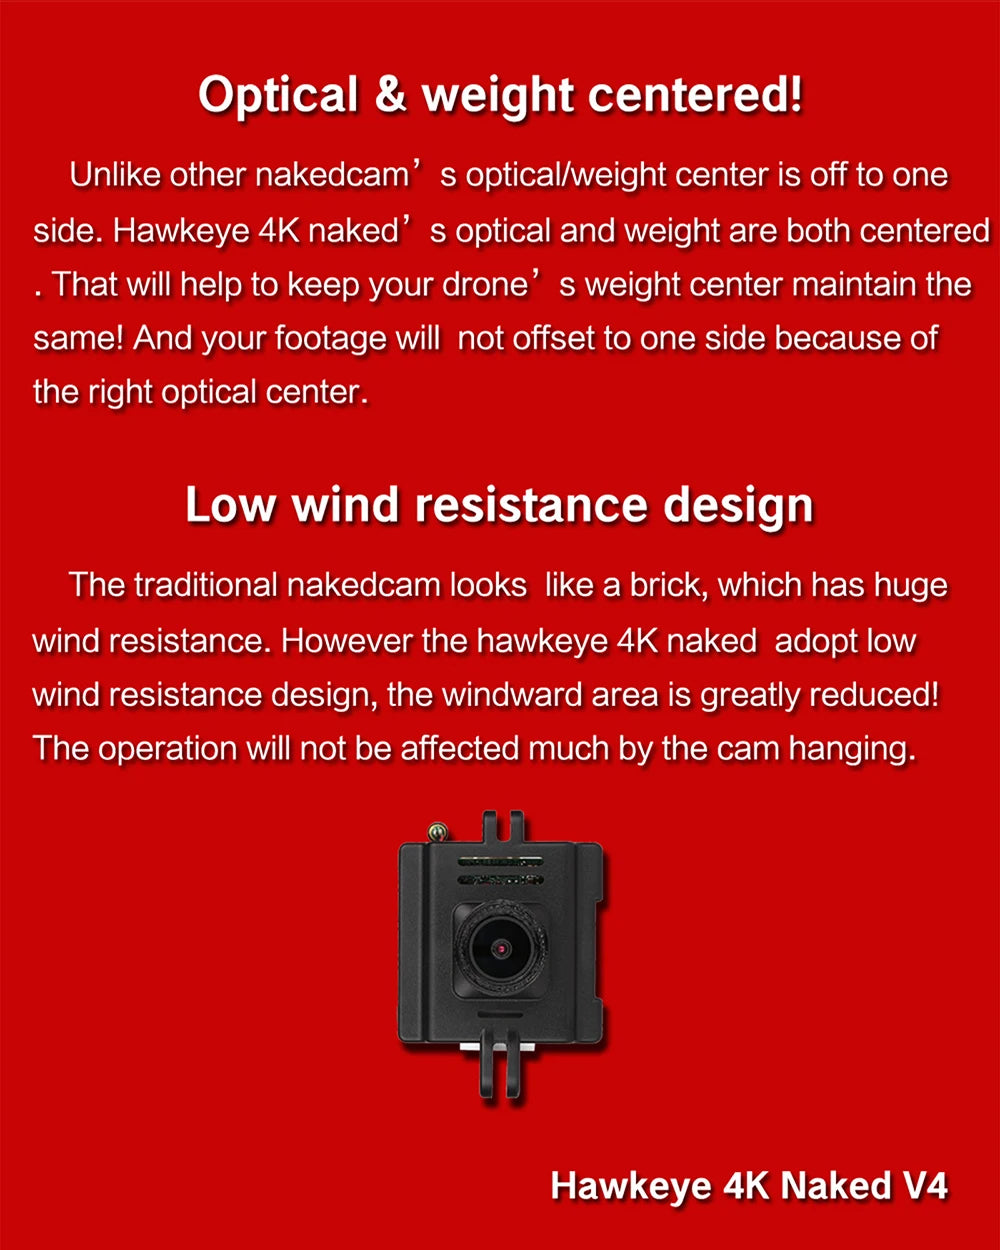 hawkeye 4K naked adopt low wind resistance design, the windward area is greatly reduced